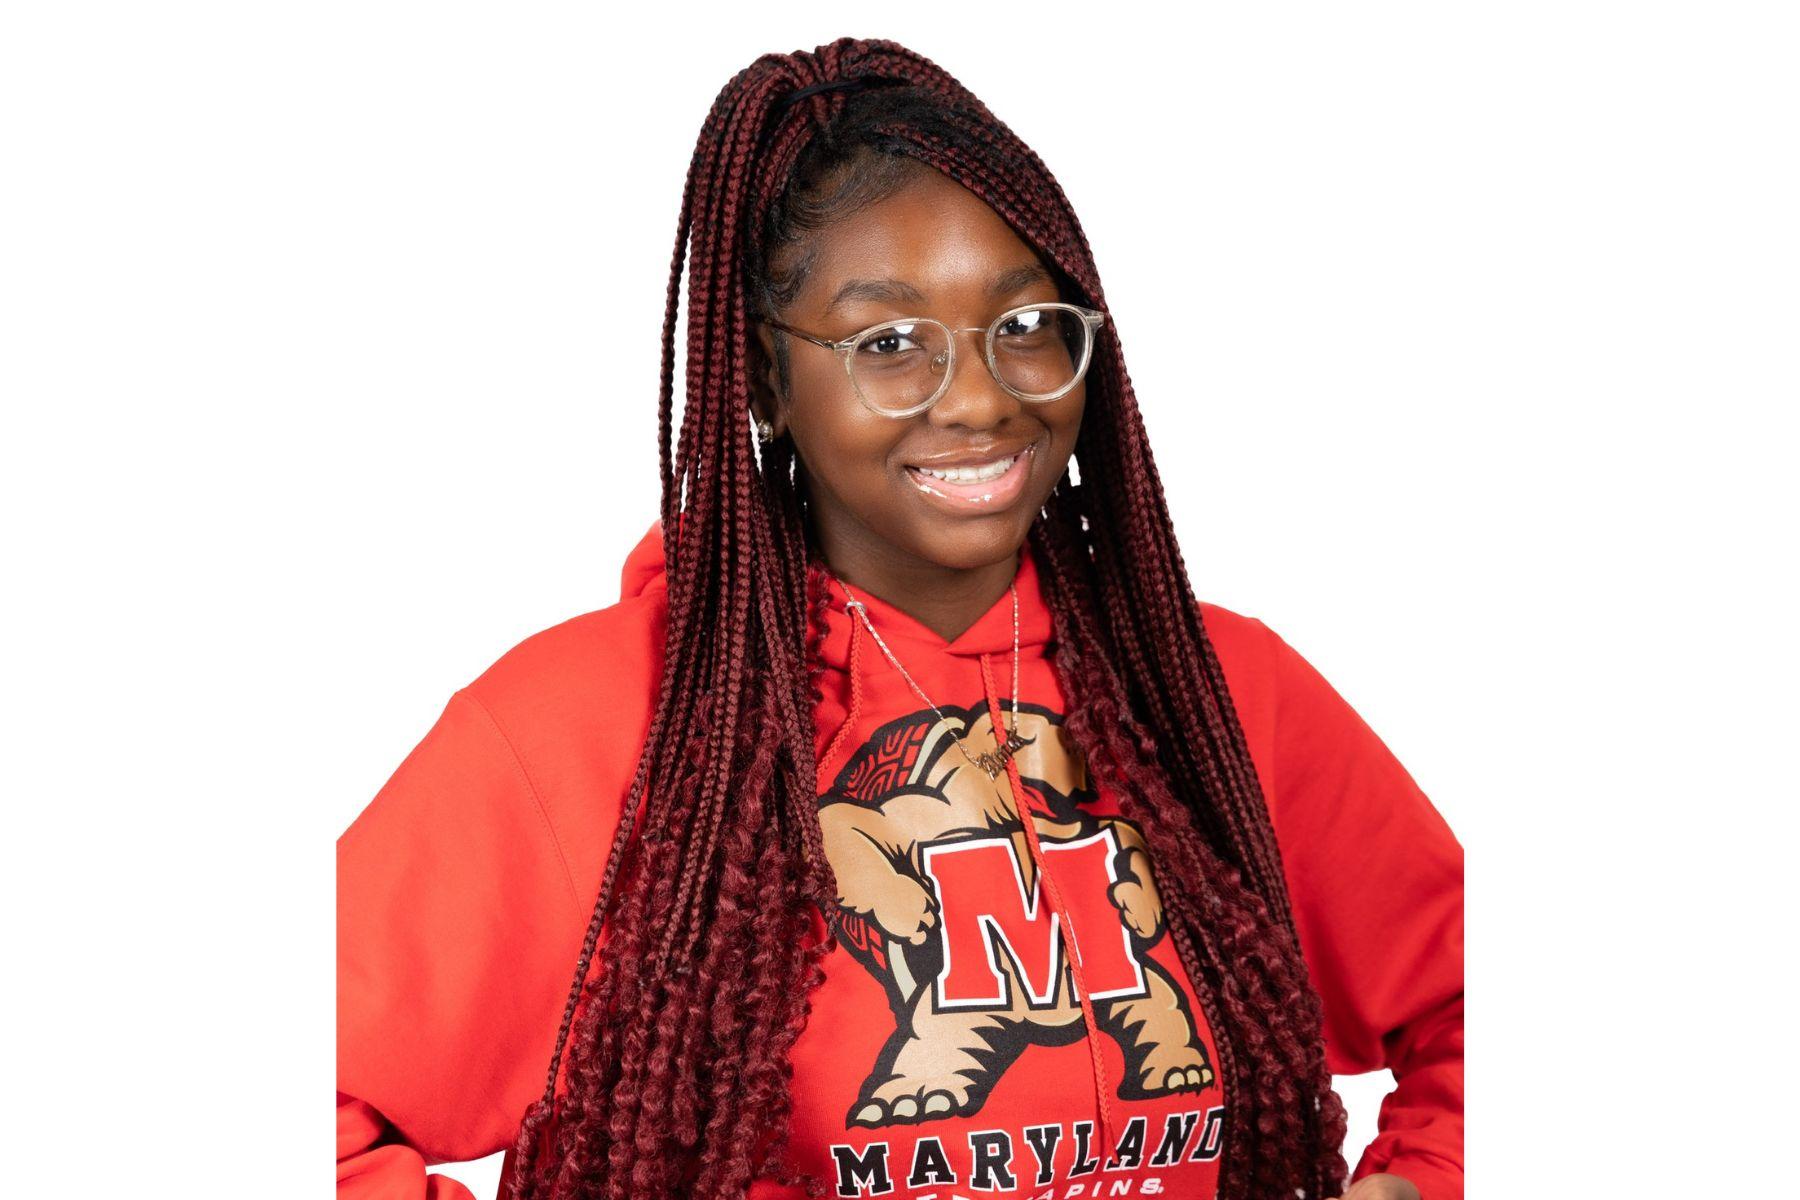 Queensley is wearing a Maryland sweatshirt and smiling at the camera